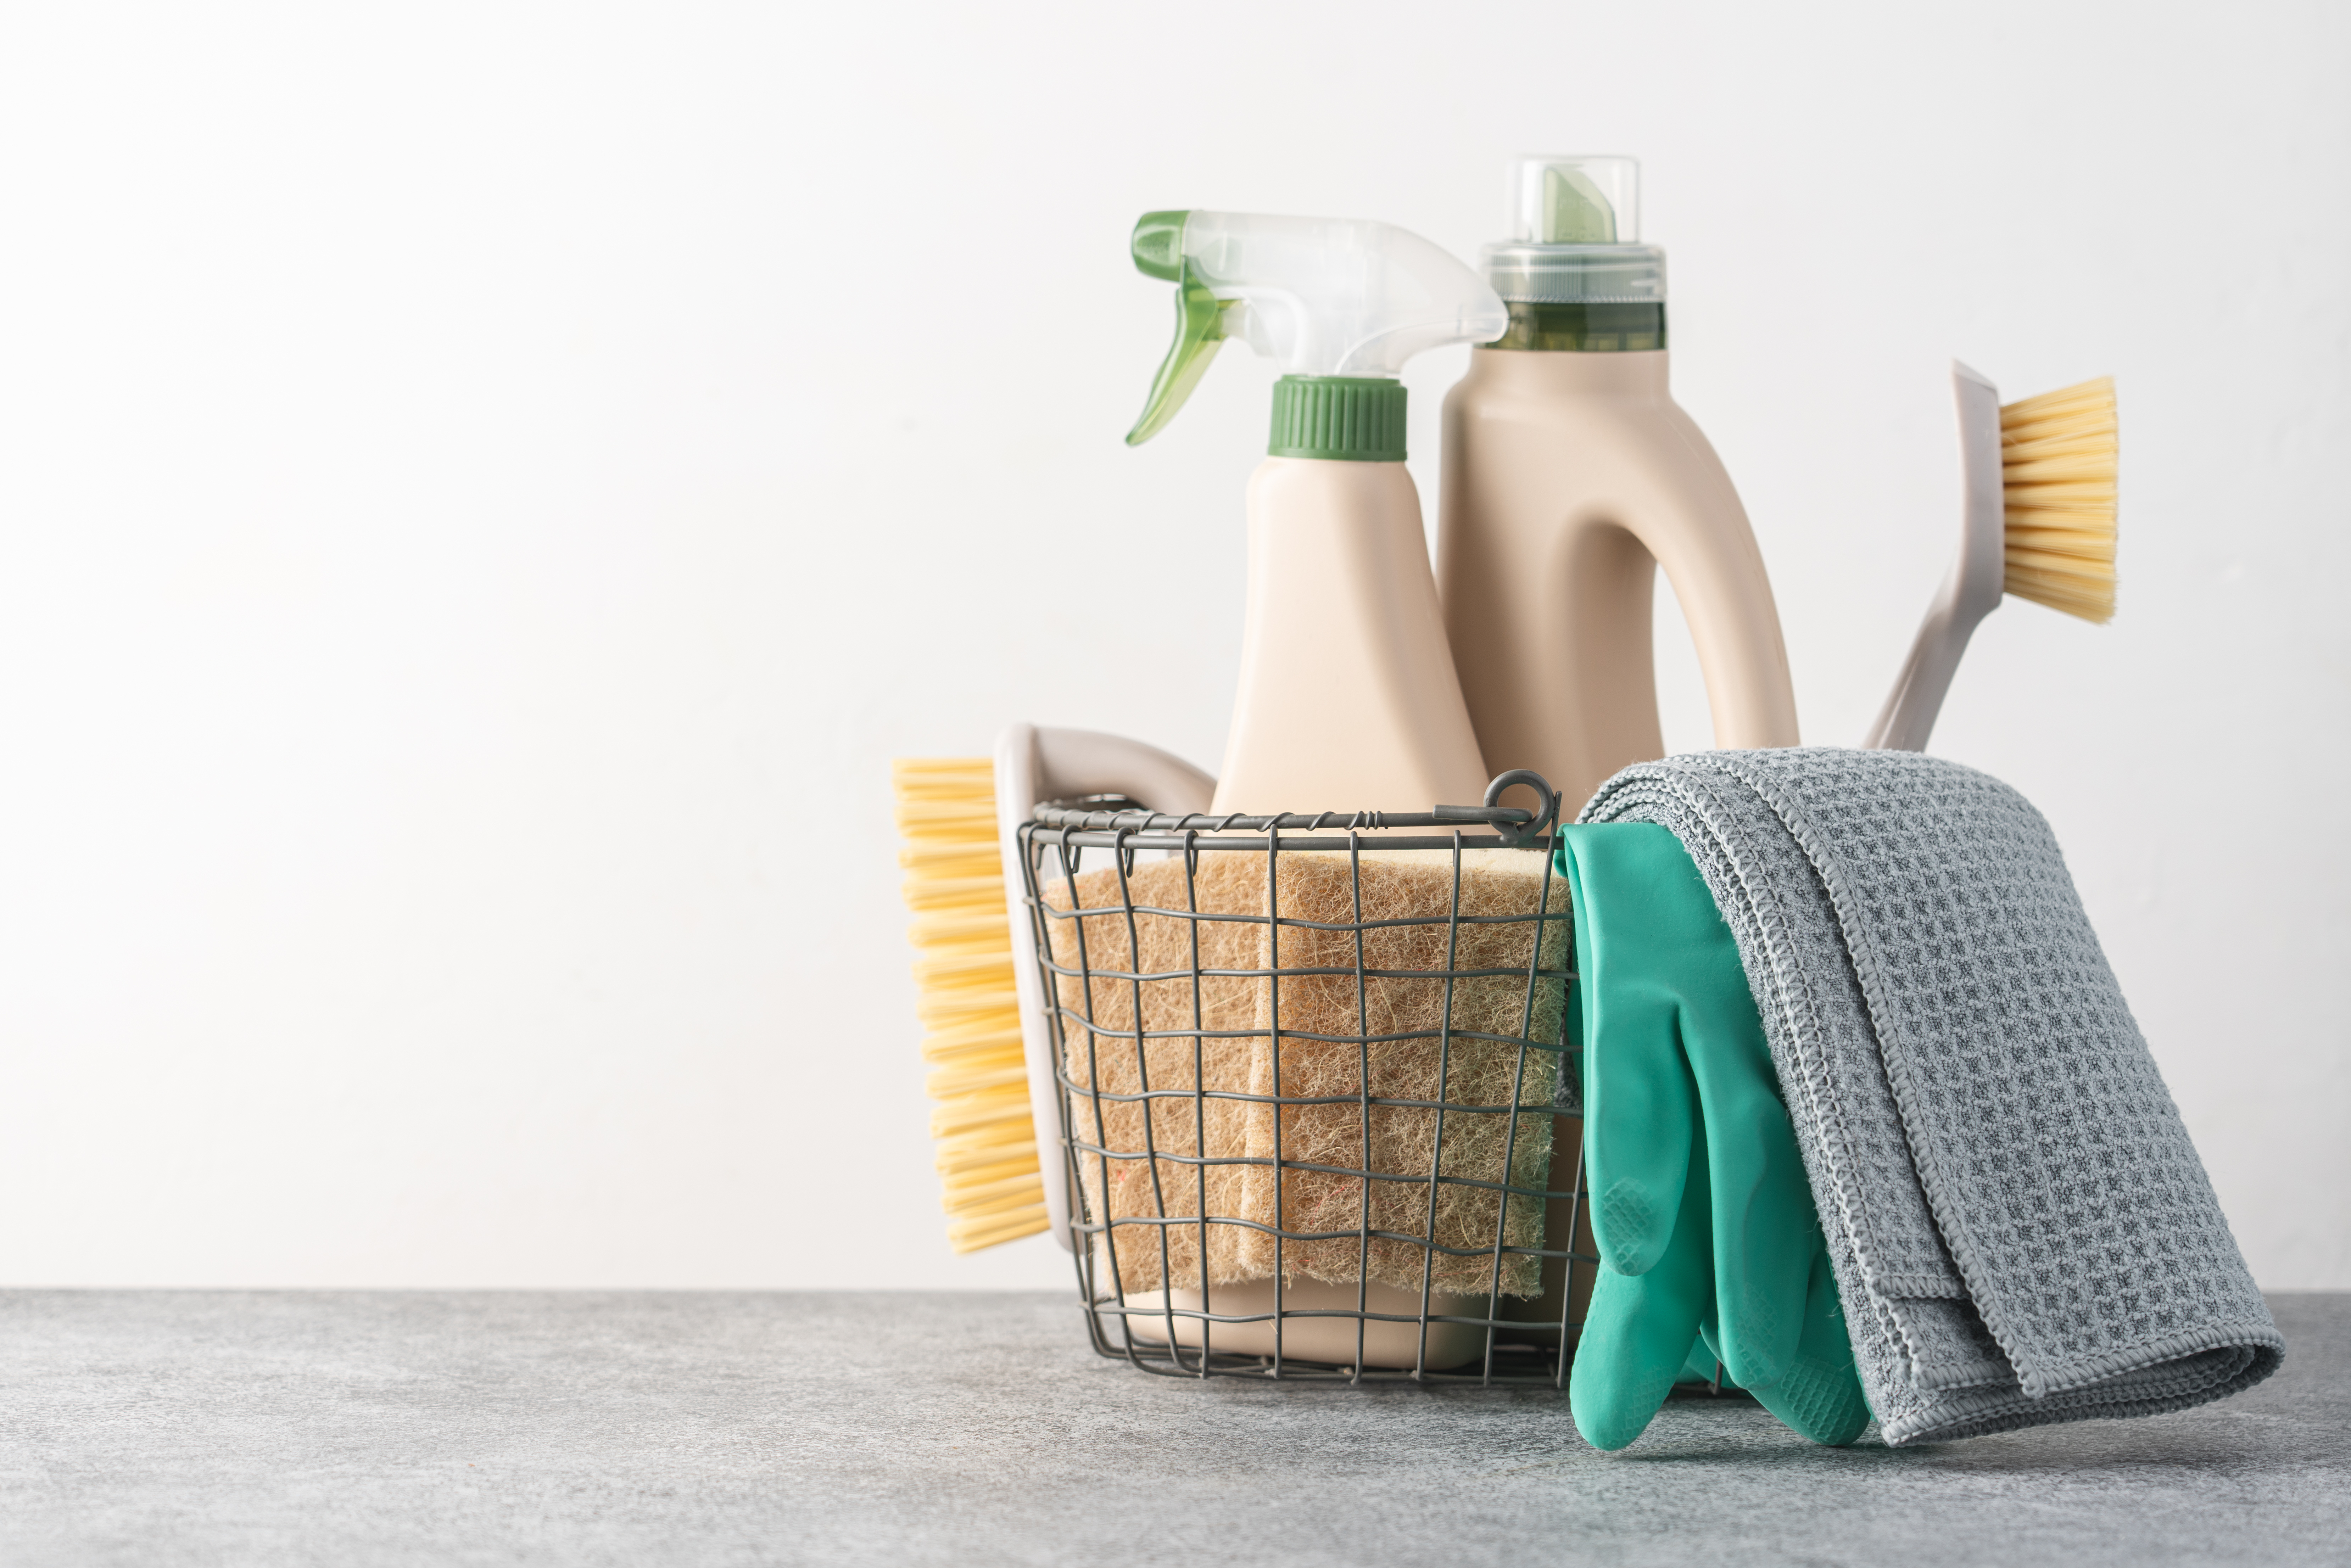 Cleaning supplies | Source: Shutterstock